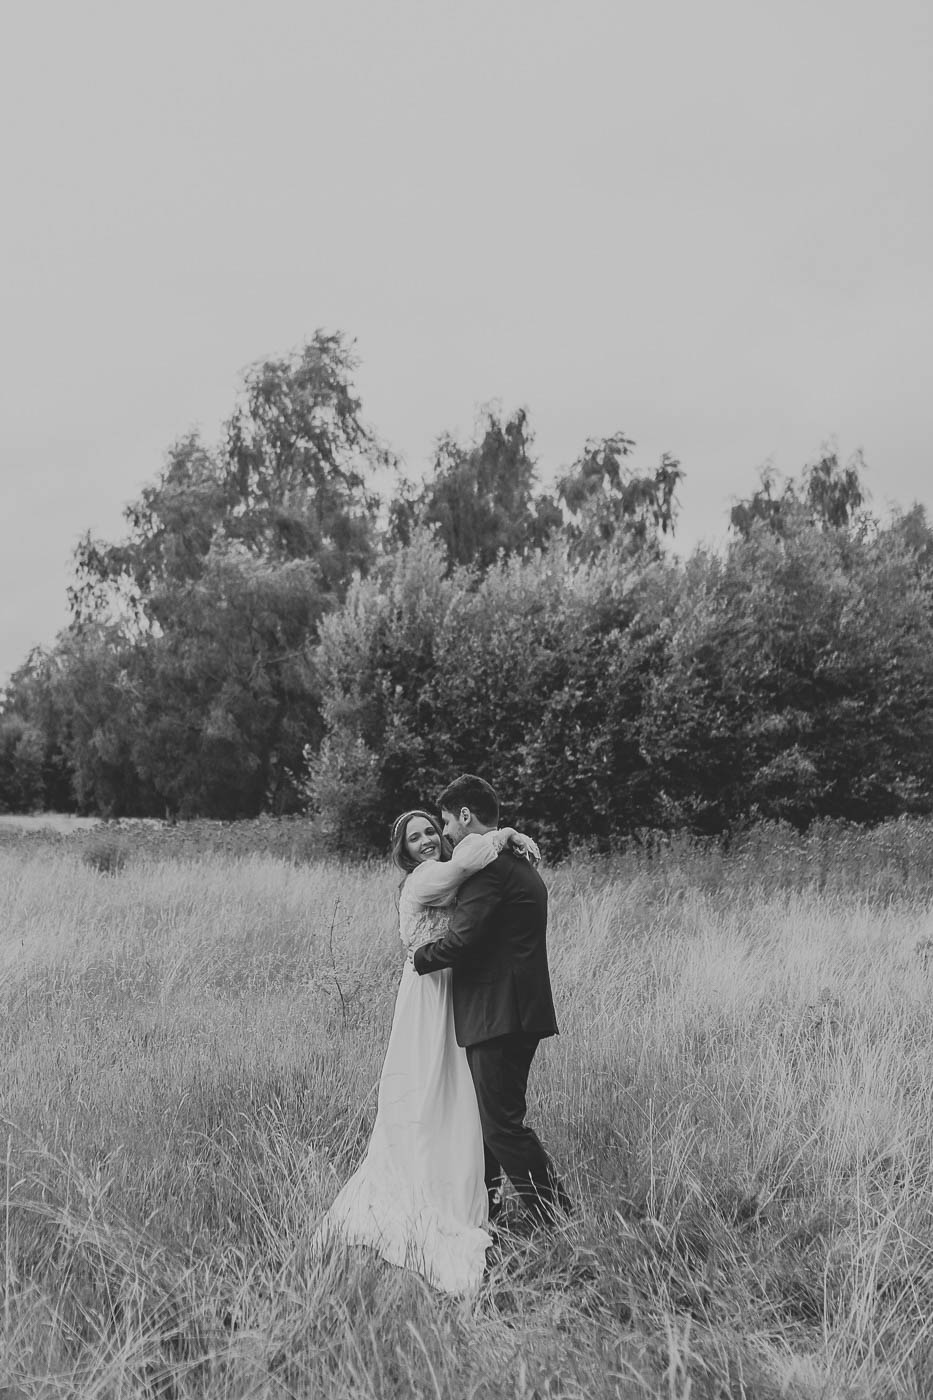 leeds wedding photographer | relaxed photo of bride and groom laughing in field after their wedding